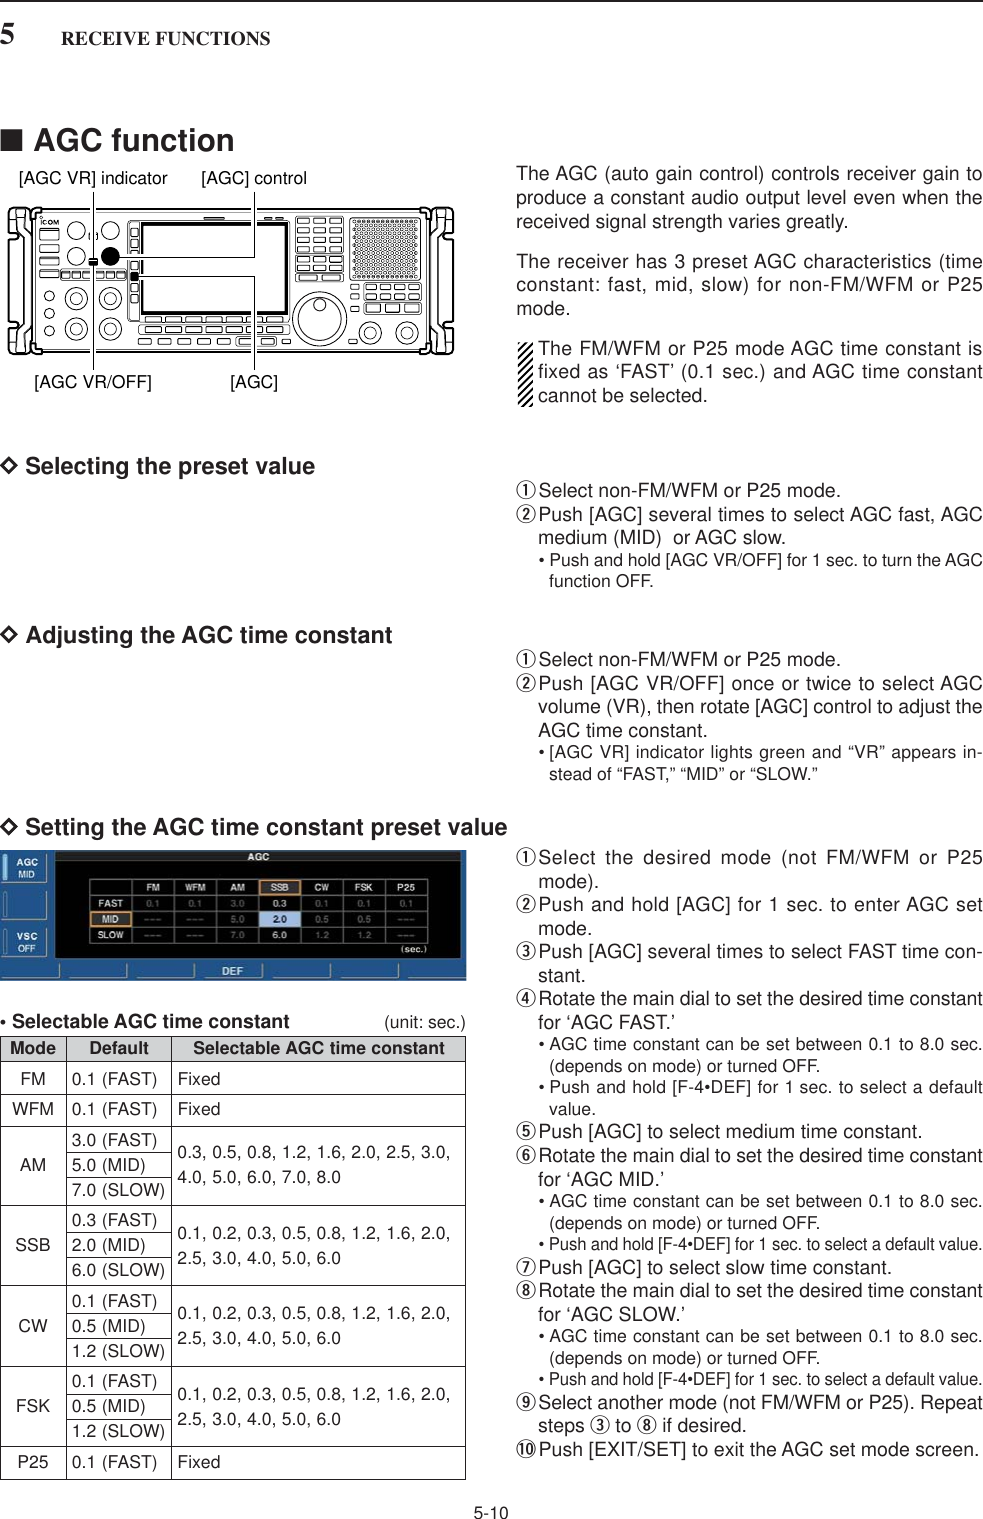 ■AGC functionThe AGC (auto gain control) controls receiver gain toproduce a constant audio output level even when thereceived signal strength varies greatly.The receiver has 3 preset AGC characteristics (timeconstant: fast, mid, slow) for non-FM/WFM or P25mode.The FM/WFM or P25 mode AGC time constant isfixed as ‘FAST’ (0.1 sec.) and AGC time constantcannot be selected.DSelecting the preset value qSelect non-FM/WFM or P25 mode.wPush [AGC] several times to select AGC fast, AGCmedium (MID)  or AGC slow.• Push and hold [AGC VR/OFF] for 1 sec. to turn the AGCfunction OFF. DAdjusting the AGC time constant  qSelect non-FM/WFM or P25 mode.wPush [AGC VR/OFF] once or twice to select AGCvolume (VR), then rotate [AGC] control to adjust theAGC time constant.• [AGC VR] indicator lights green and “VR” appears in-stead of “FAST,” “MID” or “SLOW.”DSetting the AGC time constant preset valueqSelect the desired mode (not FM/WFM or P25mode).wPush and hold [AGC] for 1 sec. to enter AGC setmode.ePush [AGC] several times to select FAST time con-stant.rRotate the main dial to set the desired time constantfor ‘AGC FAST.’• AGC time constant can be set between 0.1 to 8.0 sec.(depends on mode) or turned OFF.• Push and hold [F-4•DEF] for 1 sec. to select a defaultvalue.tPush [AGC] to select medium time constant.yRotate the main dial to set the desired time constantfor ‘AGC MID.’• AGC time constant can be set between 0.1 to 8.0 sec.(depends on mode) or turned OFF.• Push and hold [F-4•DEF] for 1 sec. to select a default value.uPush [AGC] to select slow time constant.iRotate the main dial to set the desired time constantfor ‘AGC SLOW.’• AGC time constant can be set between 0.1 to 8.0 sec.(depends on mode) or turned OFF.• Push and hold [F-4•DEF] for 1 sec. to select a default value.oSelect another mode (not FM/WFM or P25). Repeatsteps eto iif desired.!0 Push [EXIT/SET] to exit the AGC set mode screen.[AGC][AGC] control[AGC VR] indicator[AGC VR/OFF]5-105RECEIVE FUNCTIONSMode Default Selectable AGC time constantFM 0.1 (FAST) FixedWFM 0.1 (FAST) Fixed3.0 (FAST) 0.3, 0.5, 0.8, 1.2, 1.6, 2.0, 2.5, 3.0, AM 5.0 (MID) 4.0, 5.0, 6.0, 7.0, 8.07.0 (SLOW)0.3 (FAST) 0.1, 0.2, 0.3, 0.5, 0.8, 1.2, 1.6, 2.0, SSB 2.0 (MID) 2.5, 3.0, 4.0, 5.0, 6.06.0 (SLOW)0.1 (FAST) 0.1, 0.2, 0.3, 0.5, 0.8, 1.2, 1.6, 2.0, CW 0.5 (MID) 2.5, 3.0, 4.0, 5.0, 6.01.2 (SLOW)0.1 (FAST) 0.1, 0.2, 0.3, 0.5, 0.8, 1.2, 1.6, 2.0, FSK 0.5 (MID) 2.5, 3.0, 4.0, 5.0, 6.01.2 (SLOW)P25 0.1 (FAST) Fixed• Selectable AGC time constant (unit: sec.)